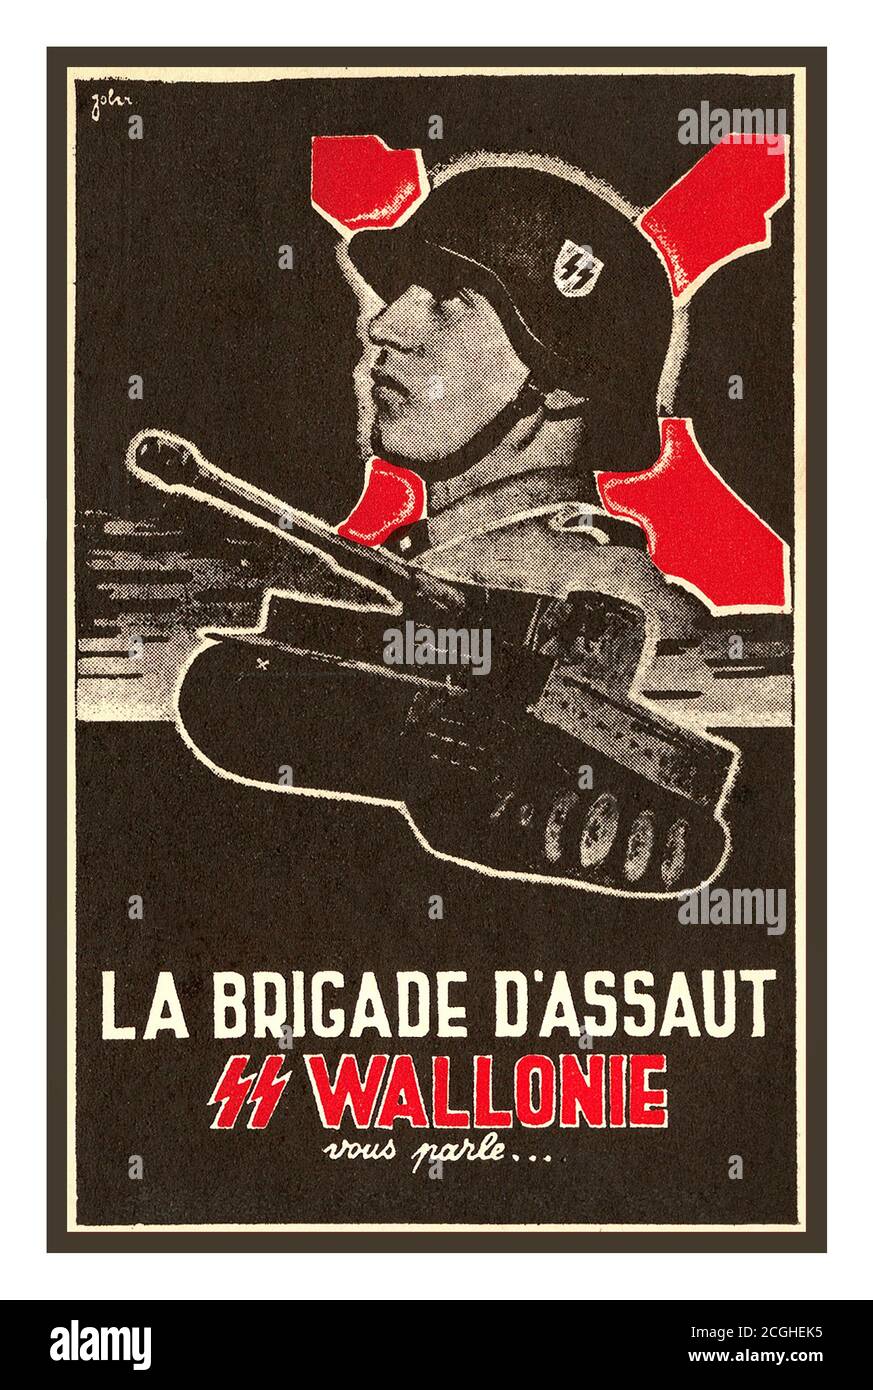 Vintage  1940’s Archive German SS Propaganda Recruiting Poster for The Walloon Legion (French: Légion Wallonie) a collaborationist military formation recruited among French-speaking volunteers from German-occupied Belgium, notably from Brussels and Wallonia, during World War II. It was formed in the aftermath of the German invasion of the Soviet Union and fought on the Eastern Front as part of the German Army (Wehrmacht) and later the Waffen SS alongside similar formations from other parts of German-occupied Europe.'La Brigade D'Assault / SS Wallonie vous parle....with tank and SS soldier Stock Photo